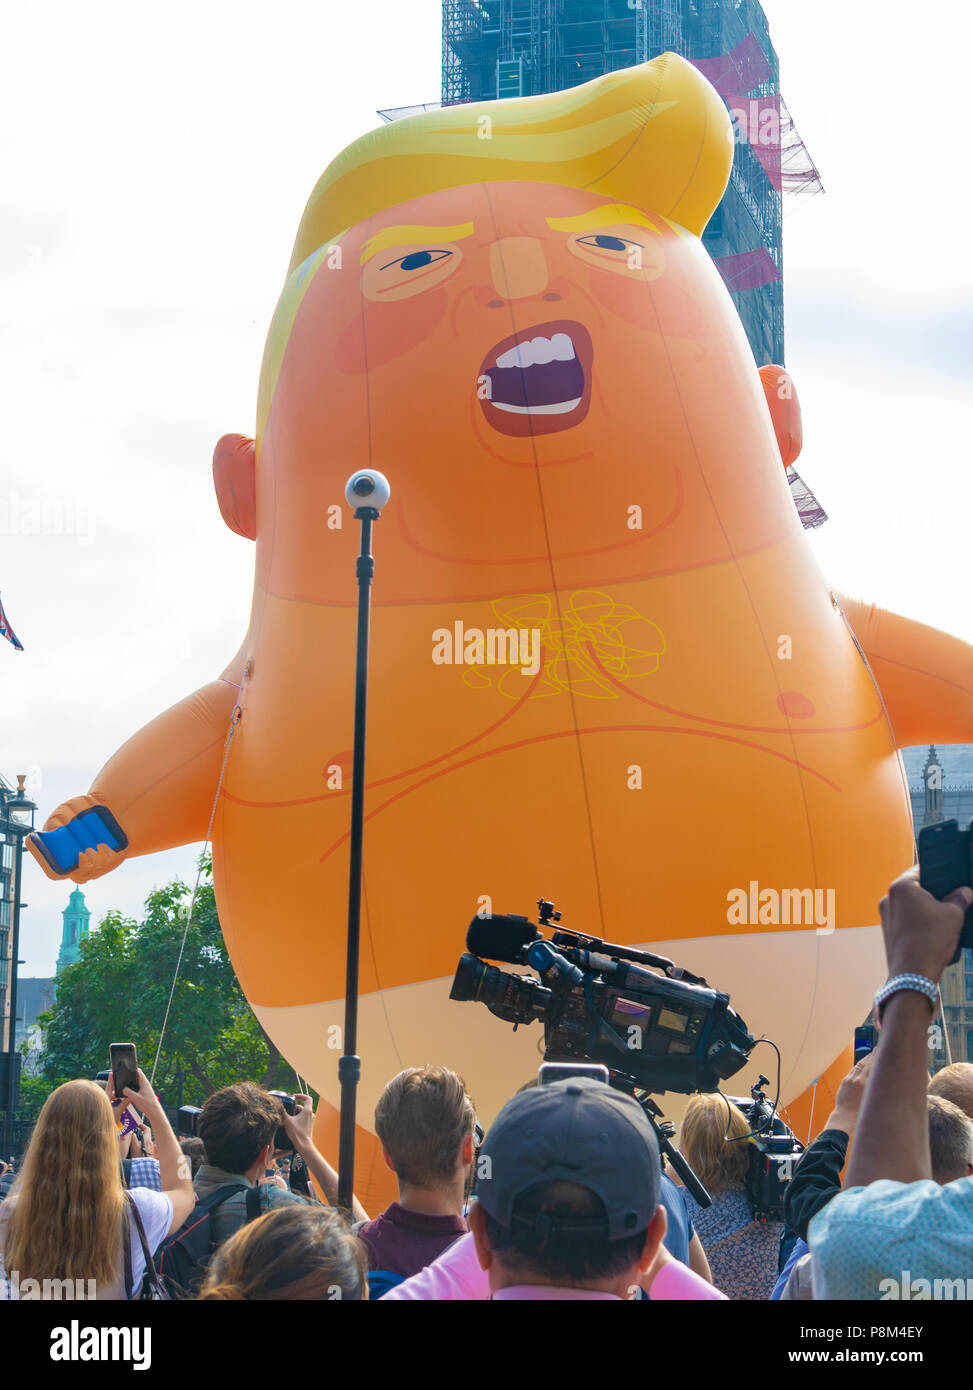 Demonstration during the visit of President Donald Trump to the UK on Friday 13th July 2018 Stock Photo